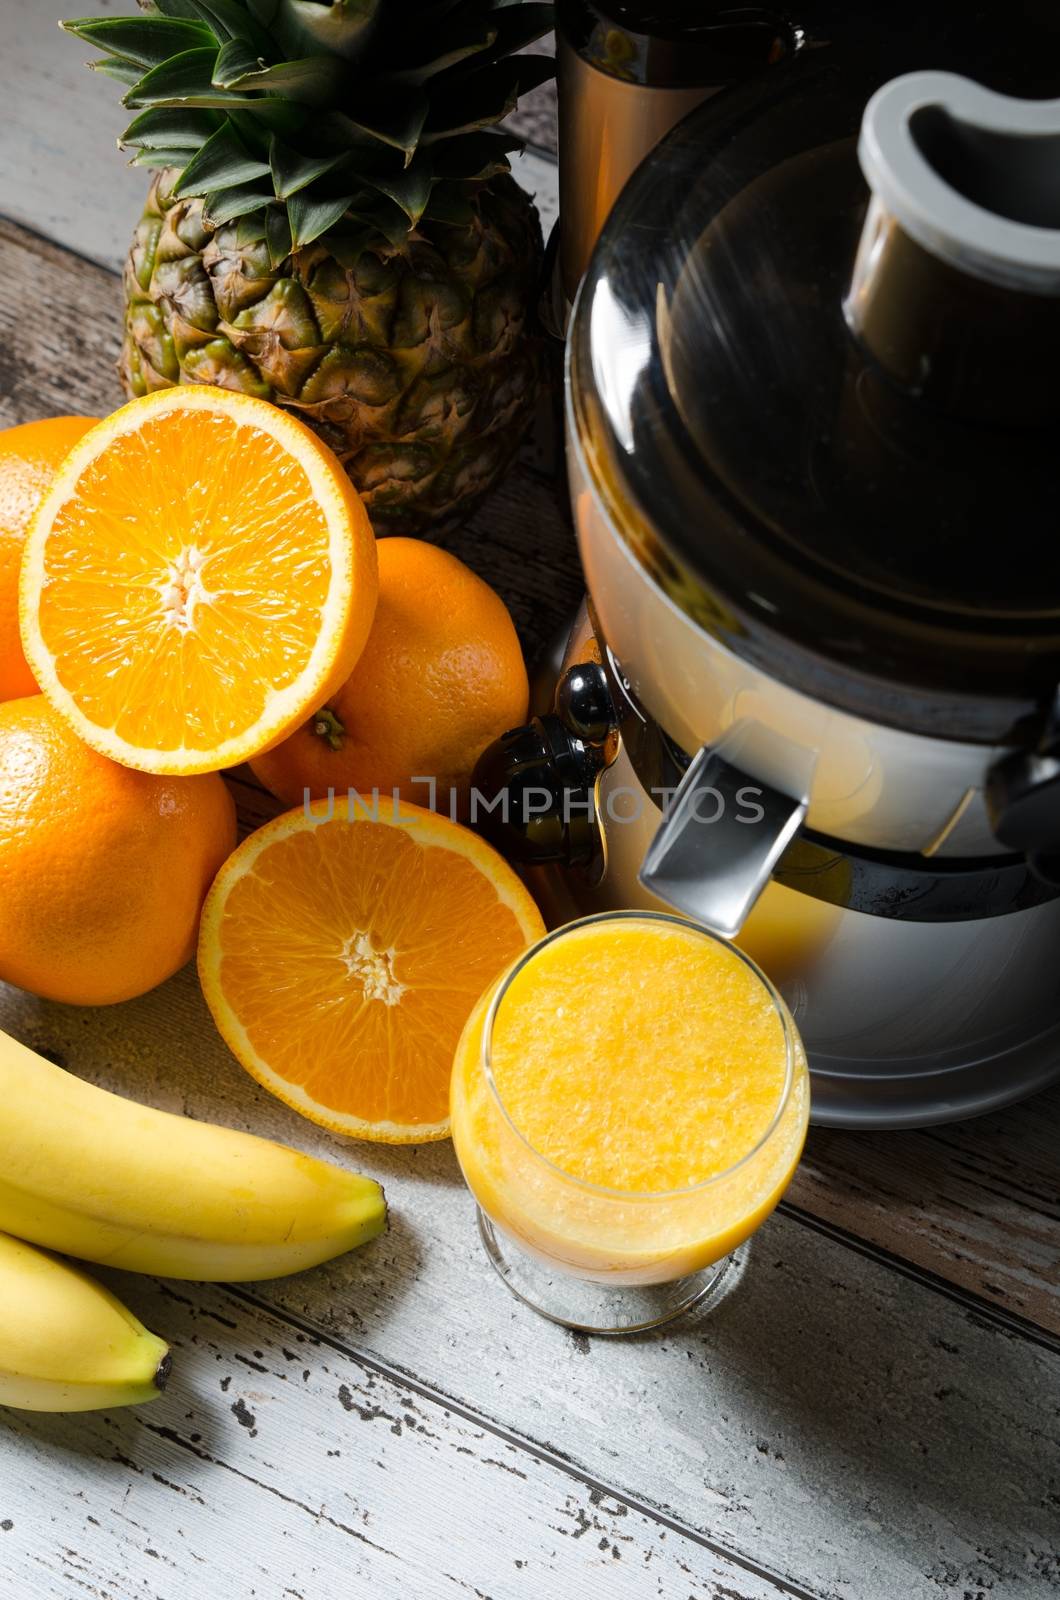 Fresh juice and juicer. Photo on wooden background  by simpson33